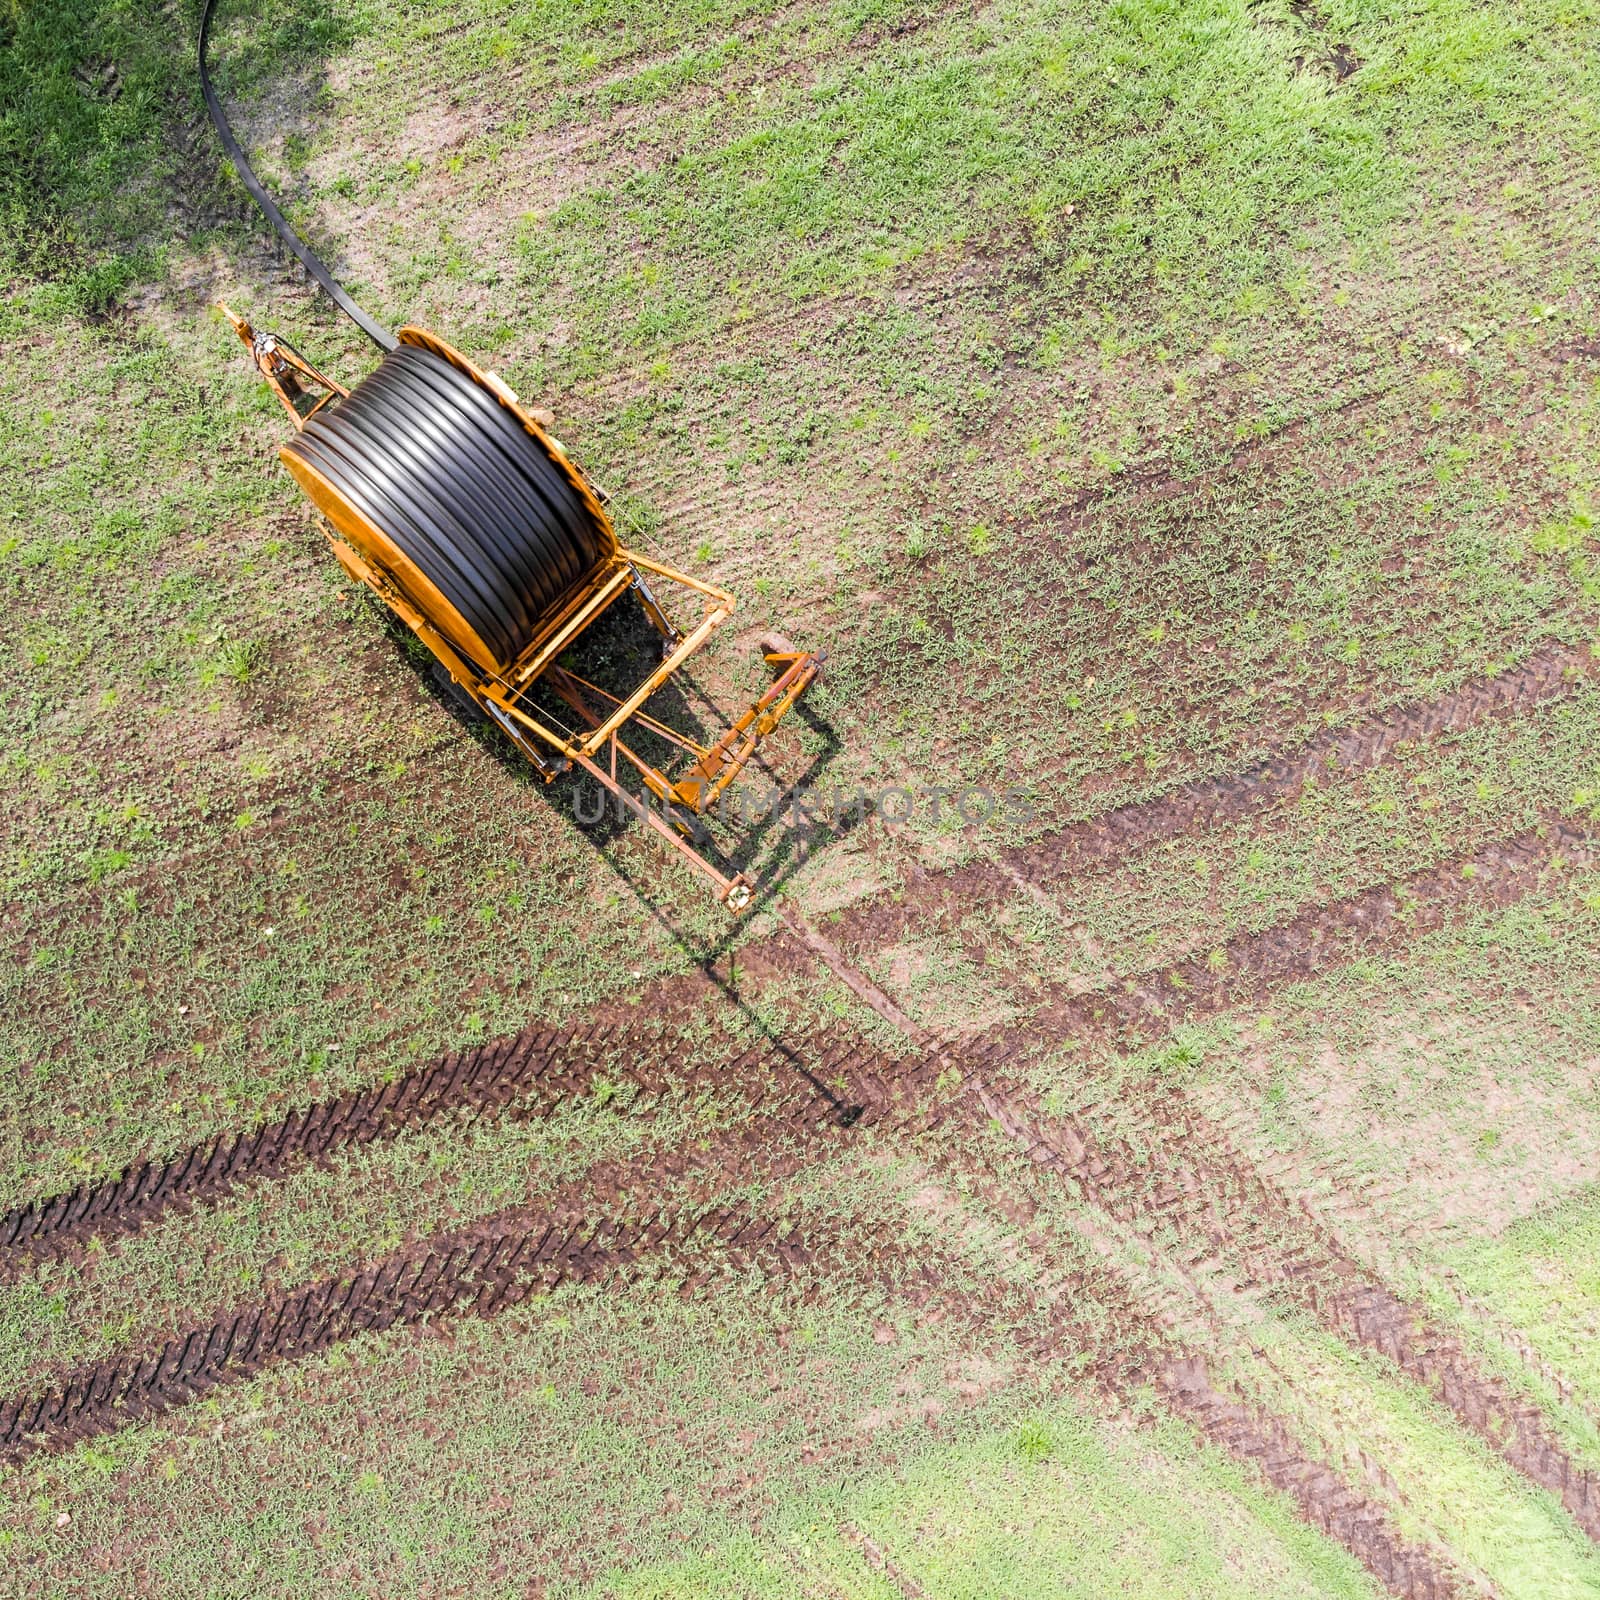 Aerial view of a huge hose cart used by the farmers to irrigate the arable land, Germany near Gifhorn by geogif